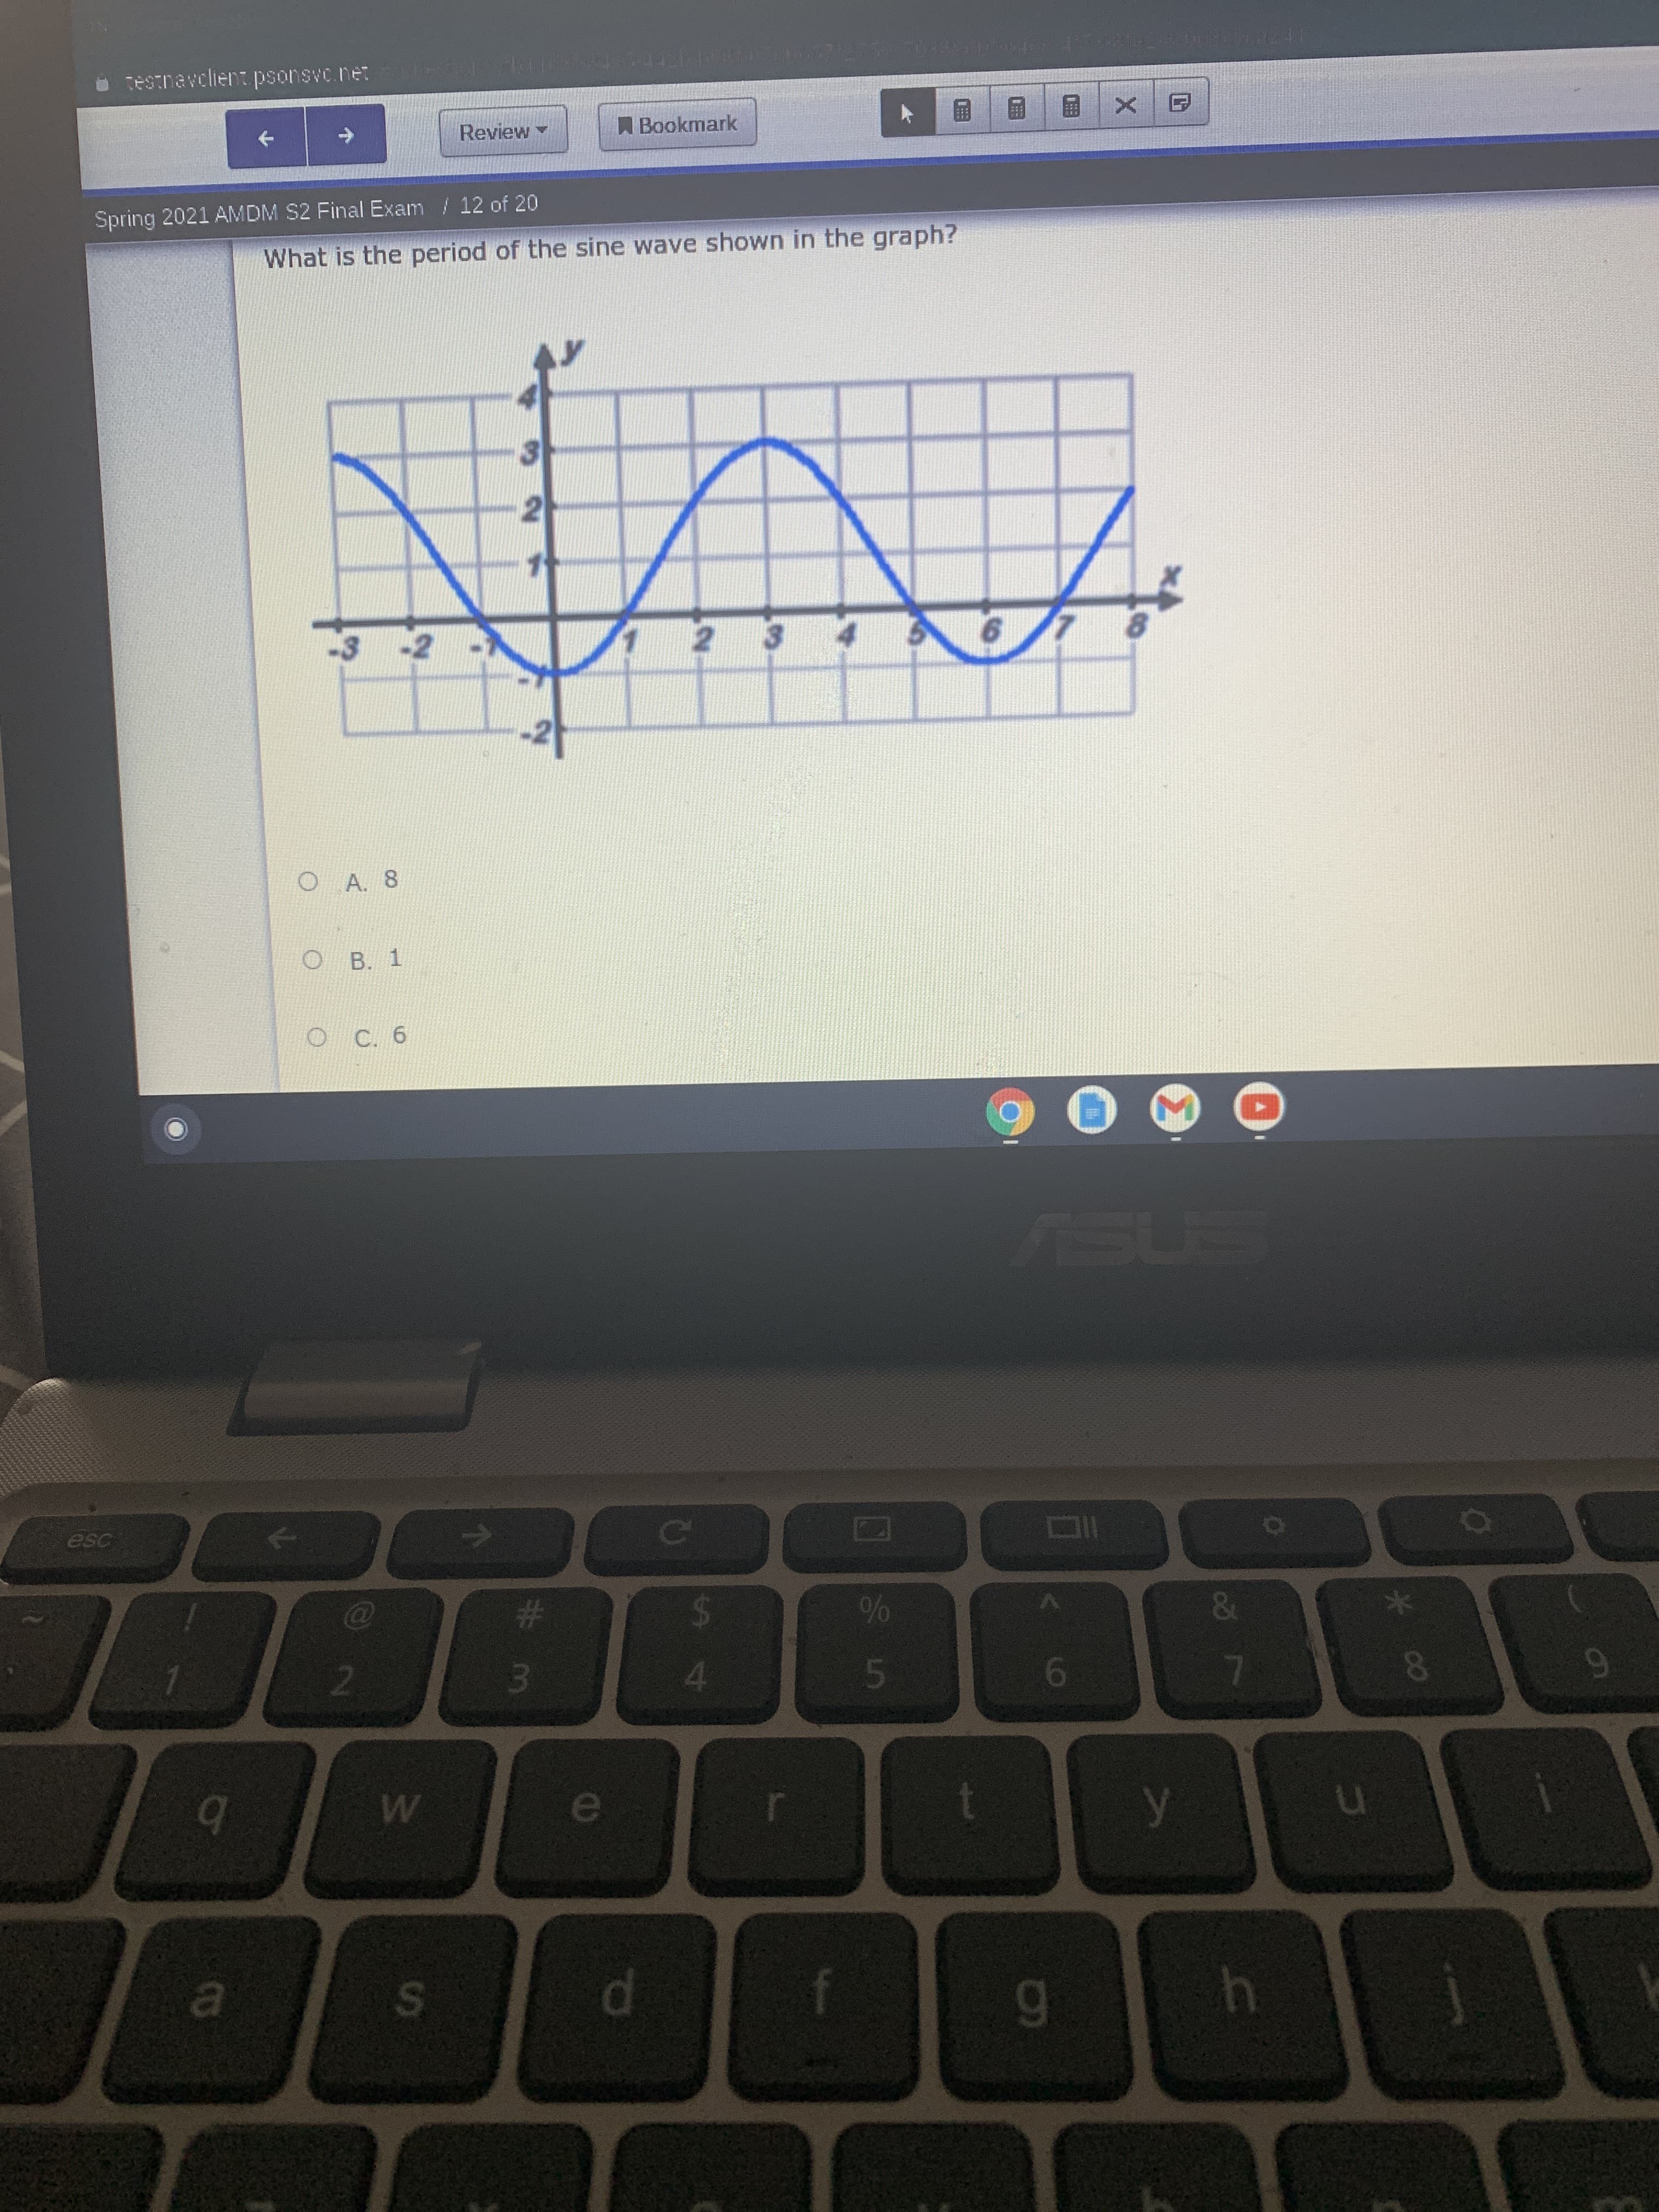 What is the period of the sine wave shown in the graph?
3 -2
2 3
6.
